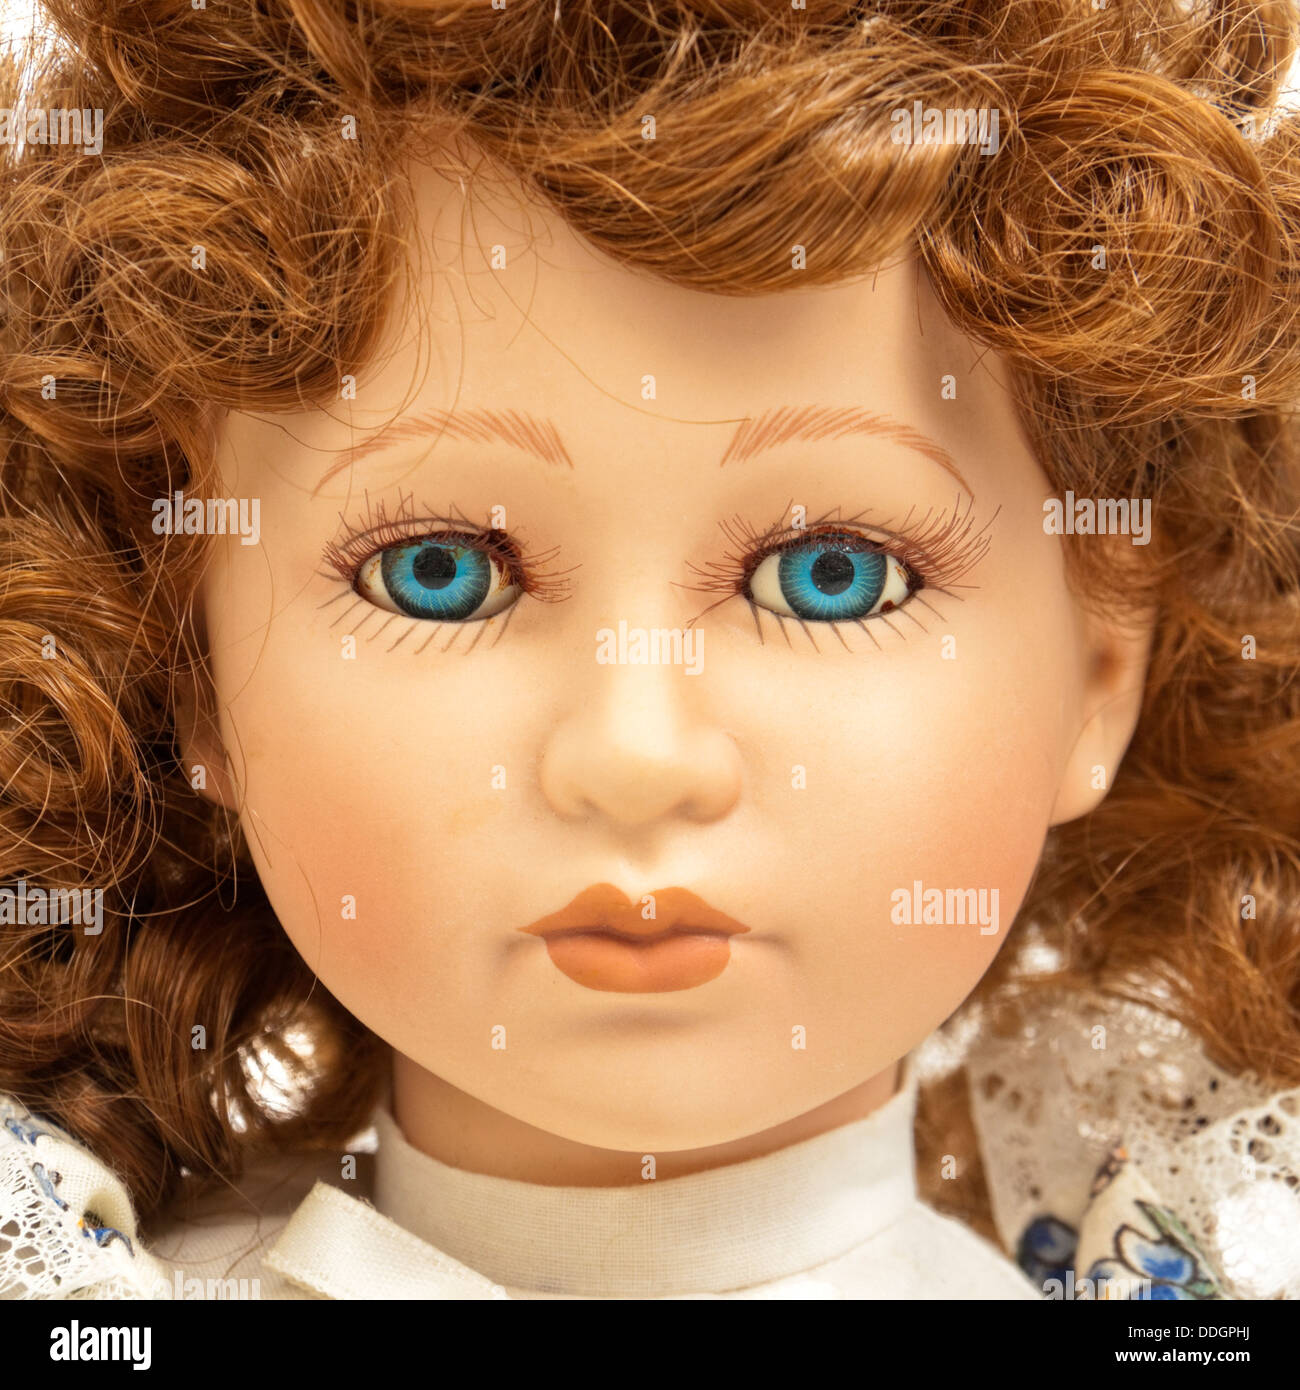 Collectable porcelain doll Stock Photo